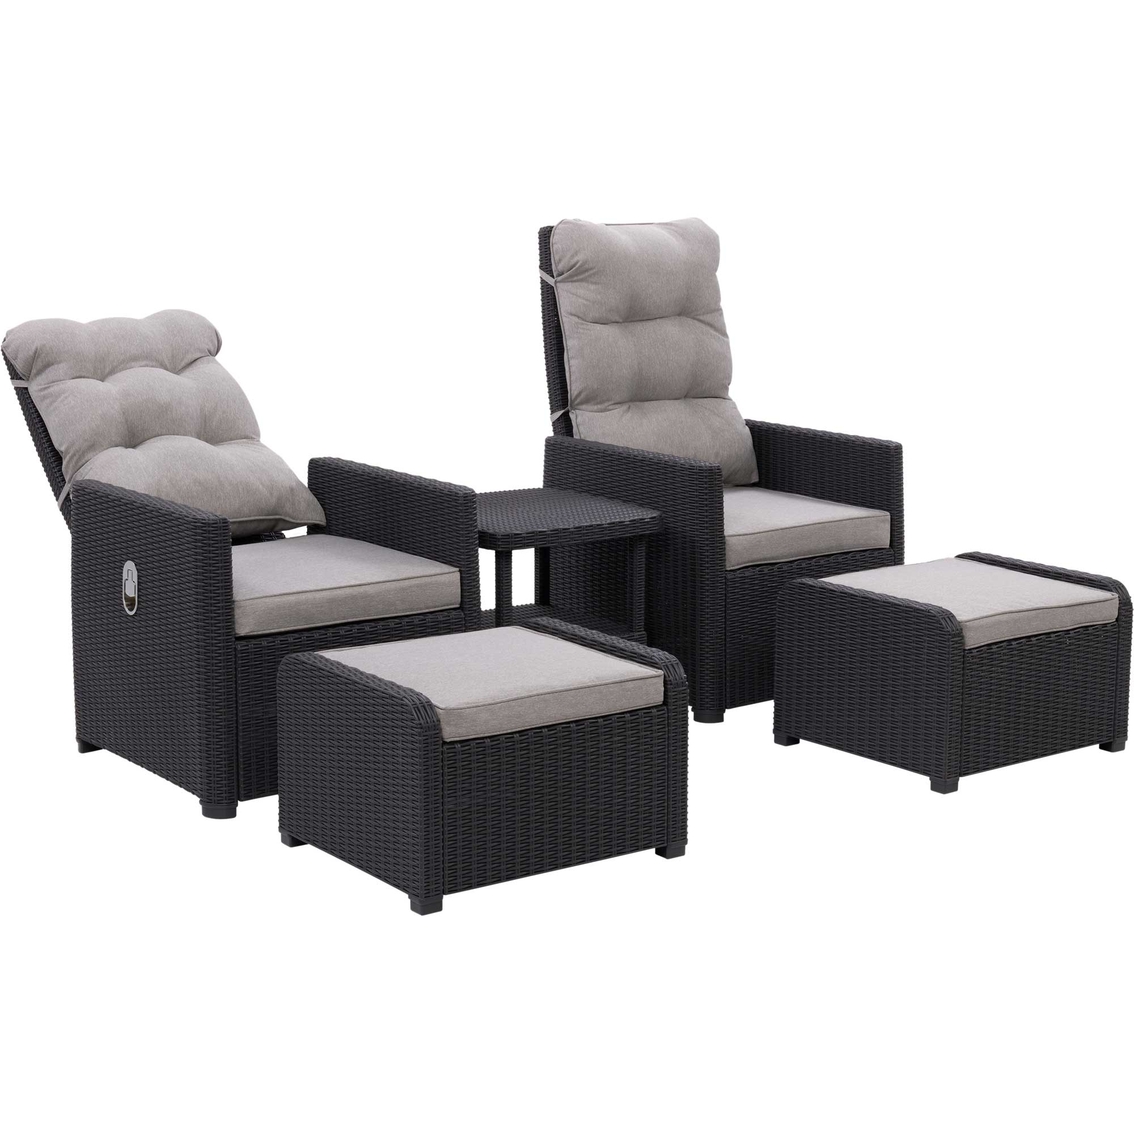 CorLiving Lake Front Rattan Patio Recliner and Ottoman Set 5 pc. - Image 3 of 9